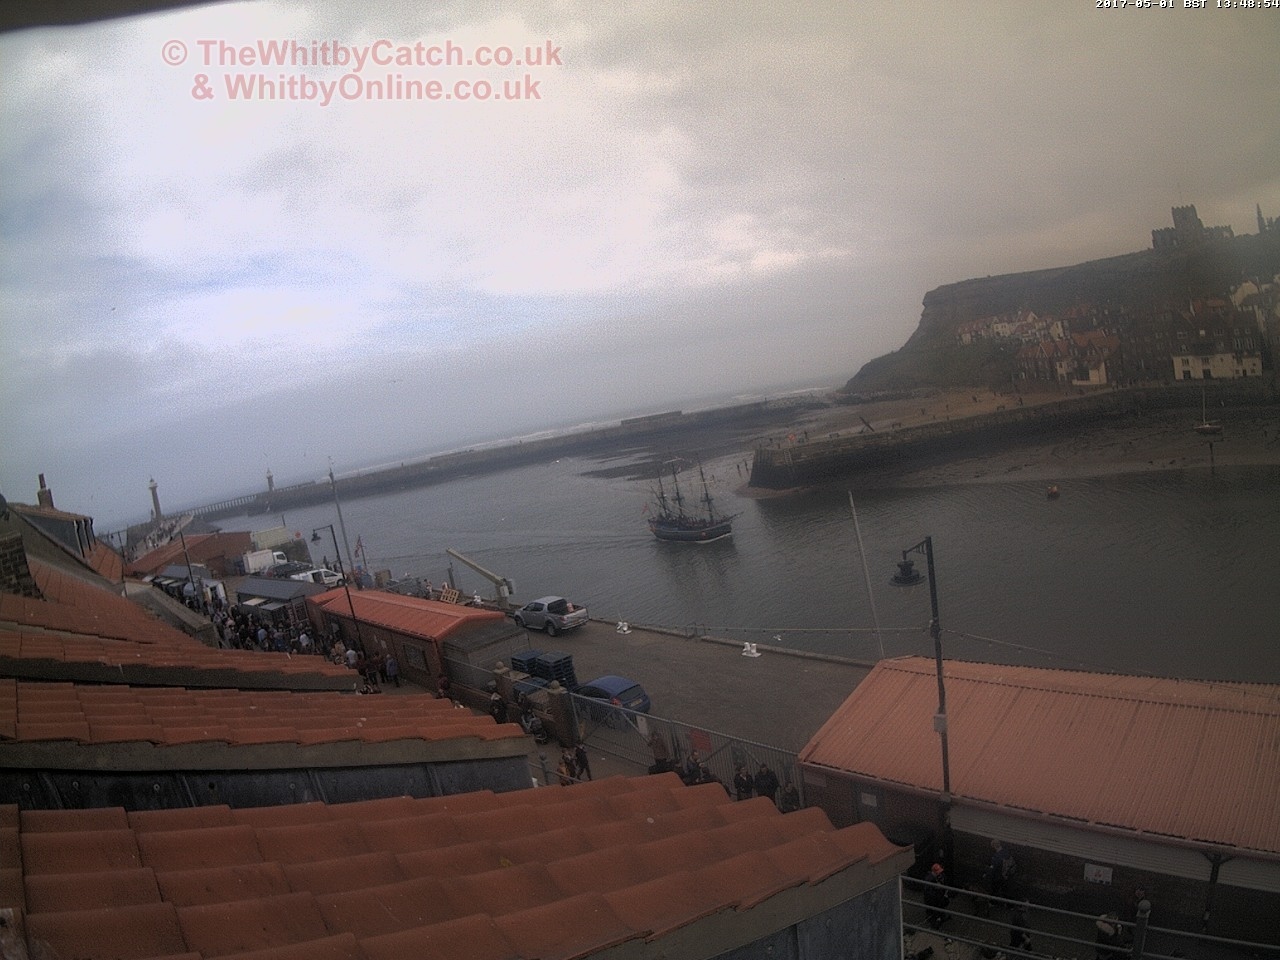 Whitby Mon 1st May 2017 13:49.